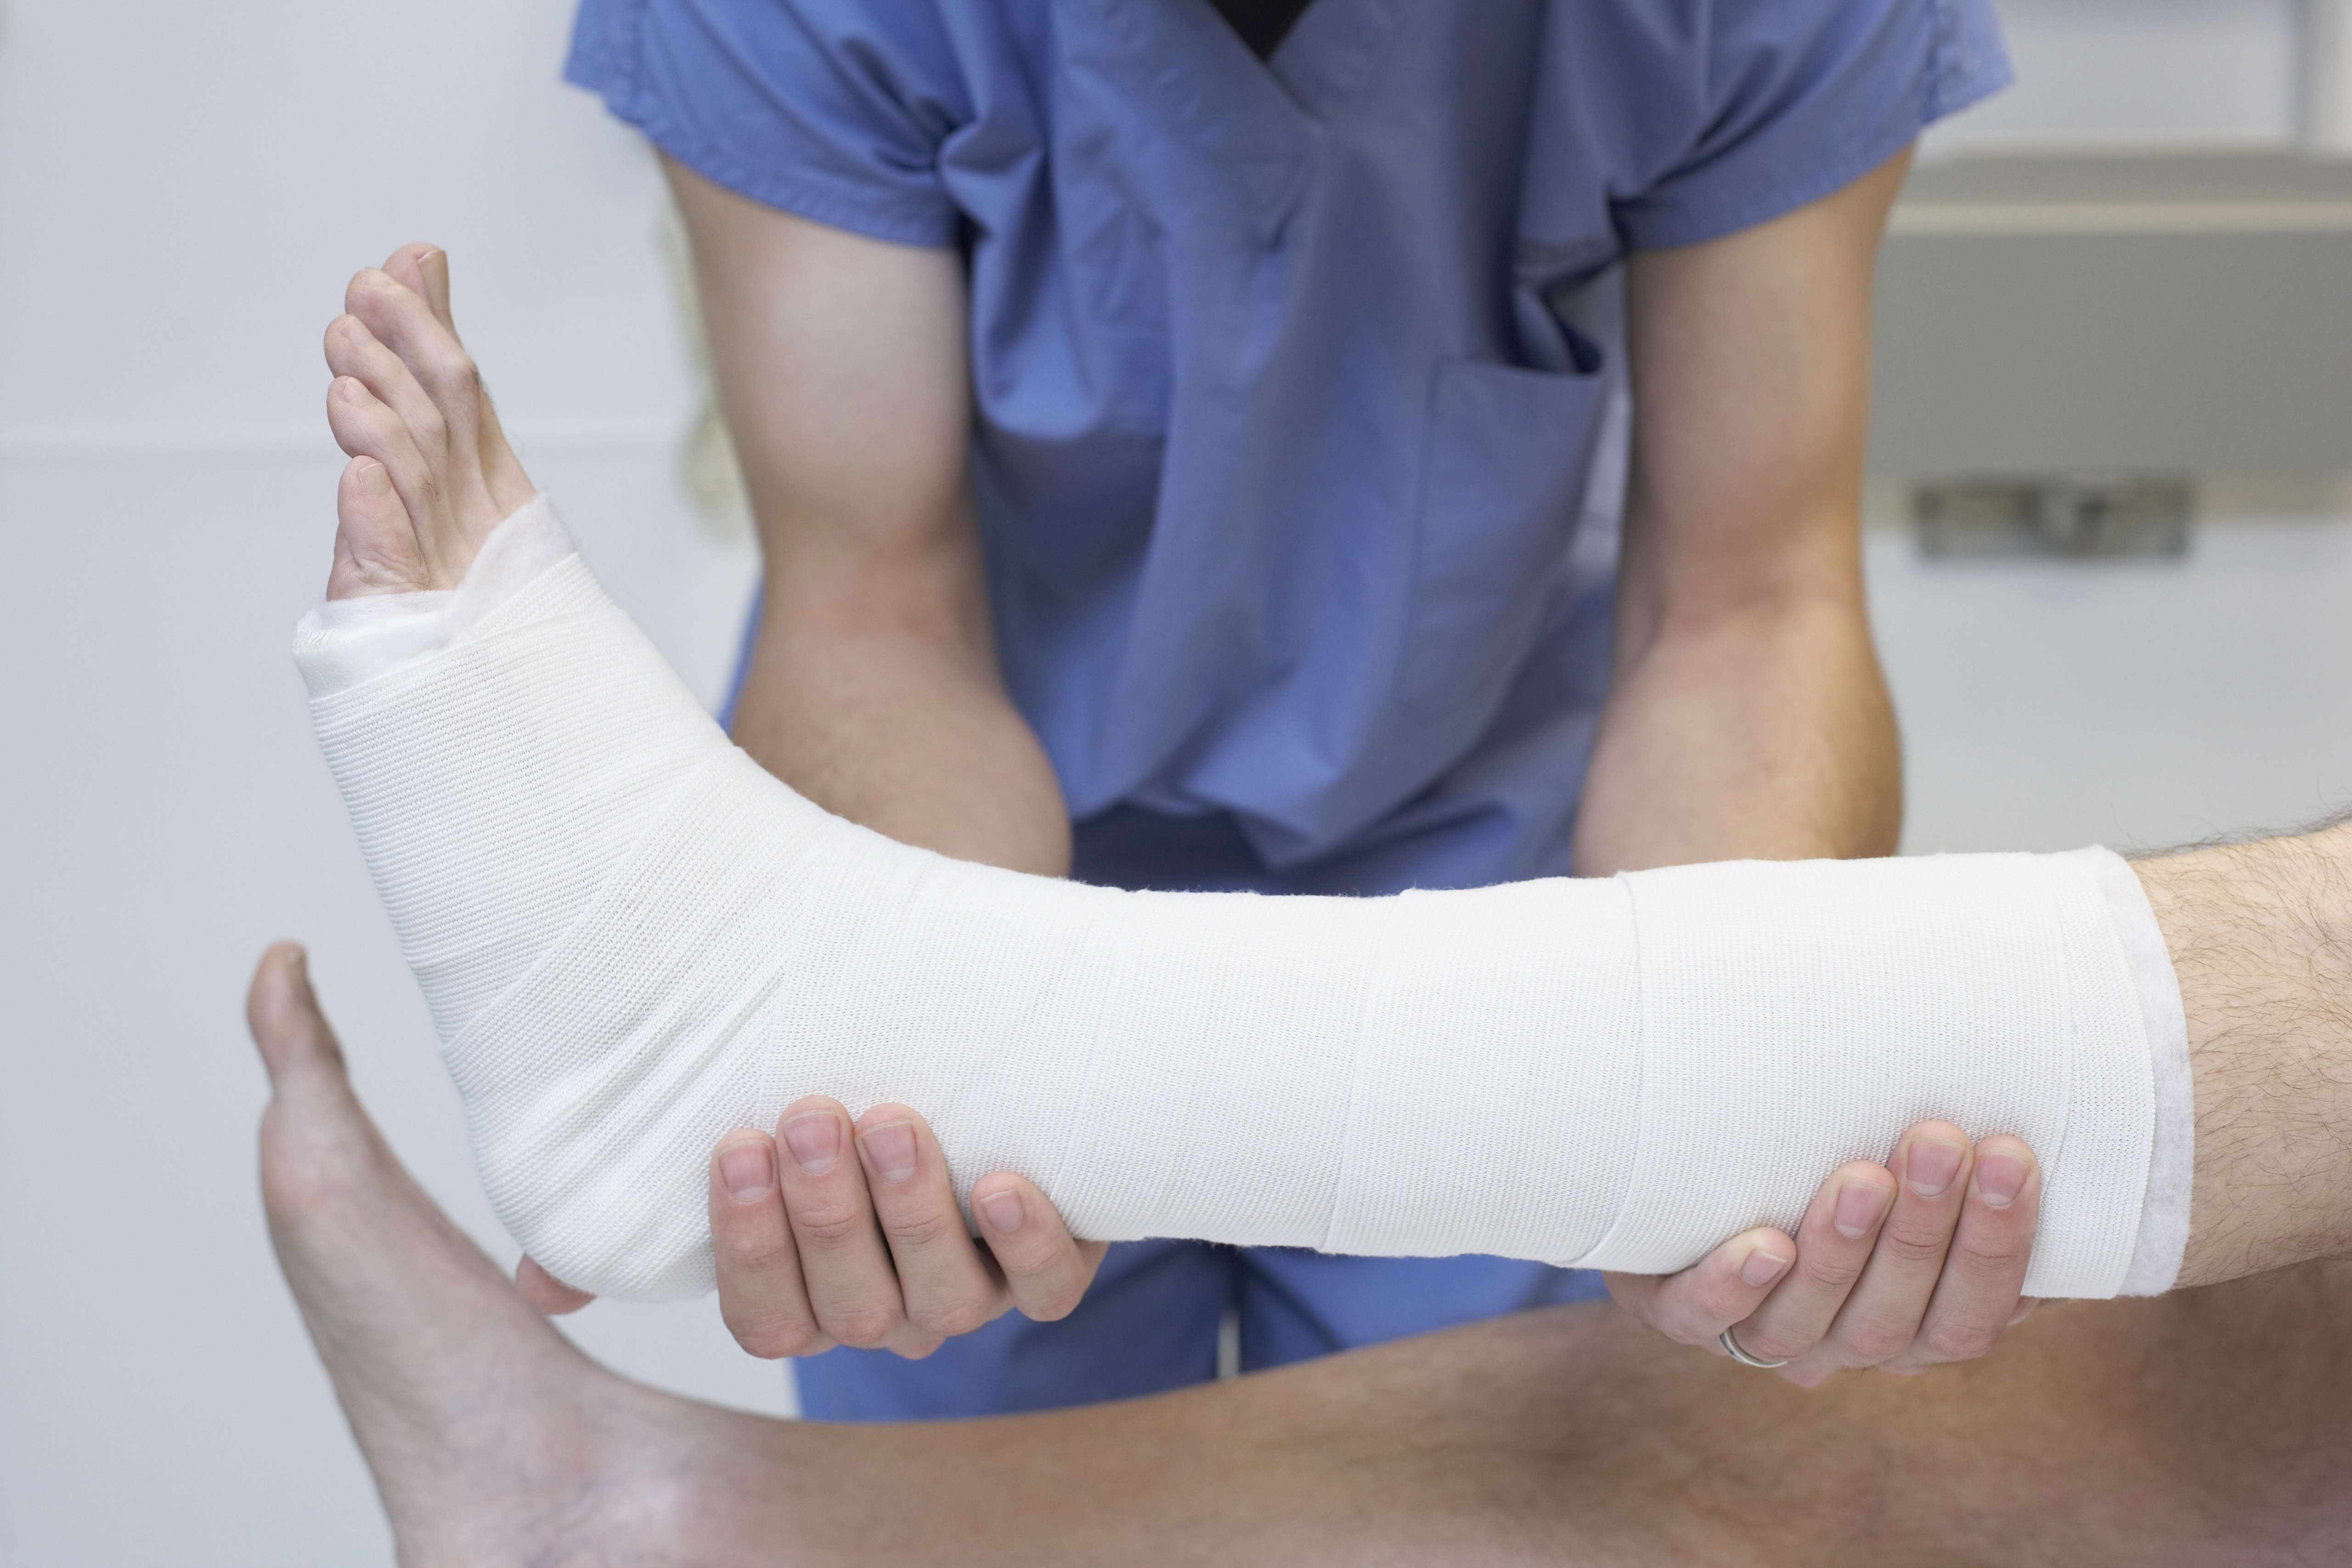 Image of a leg in a cast